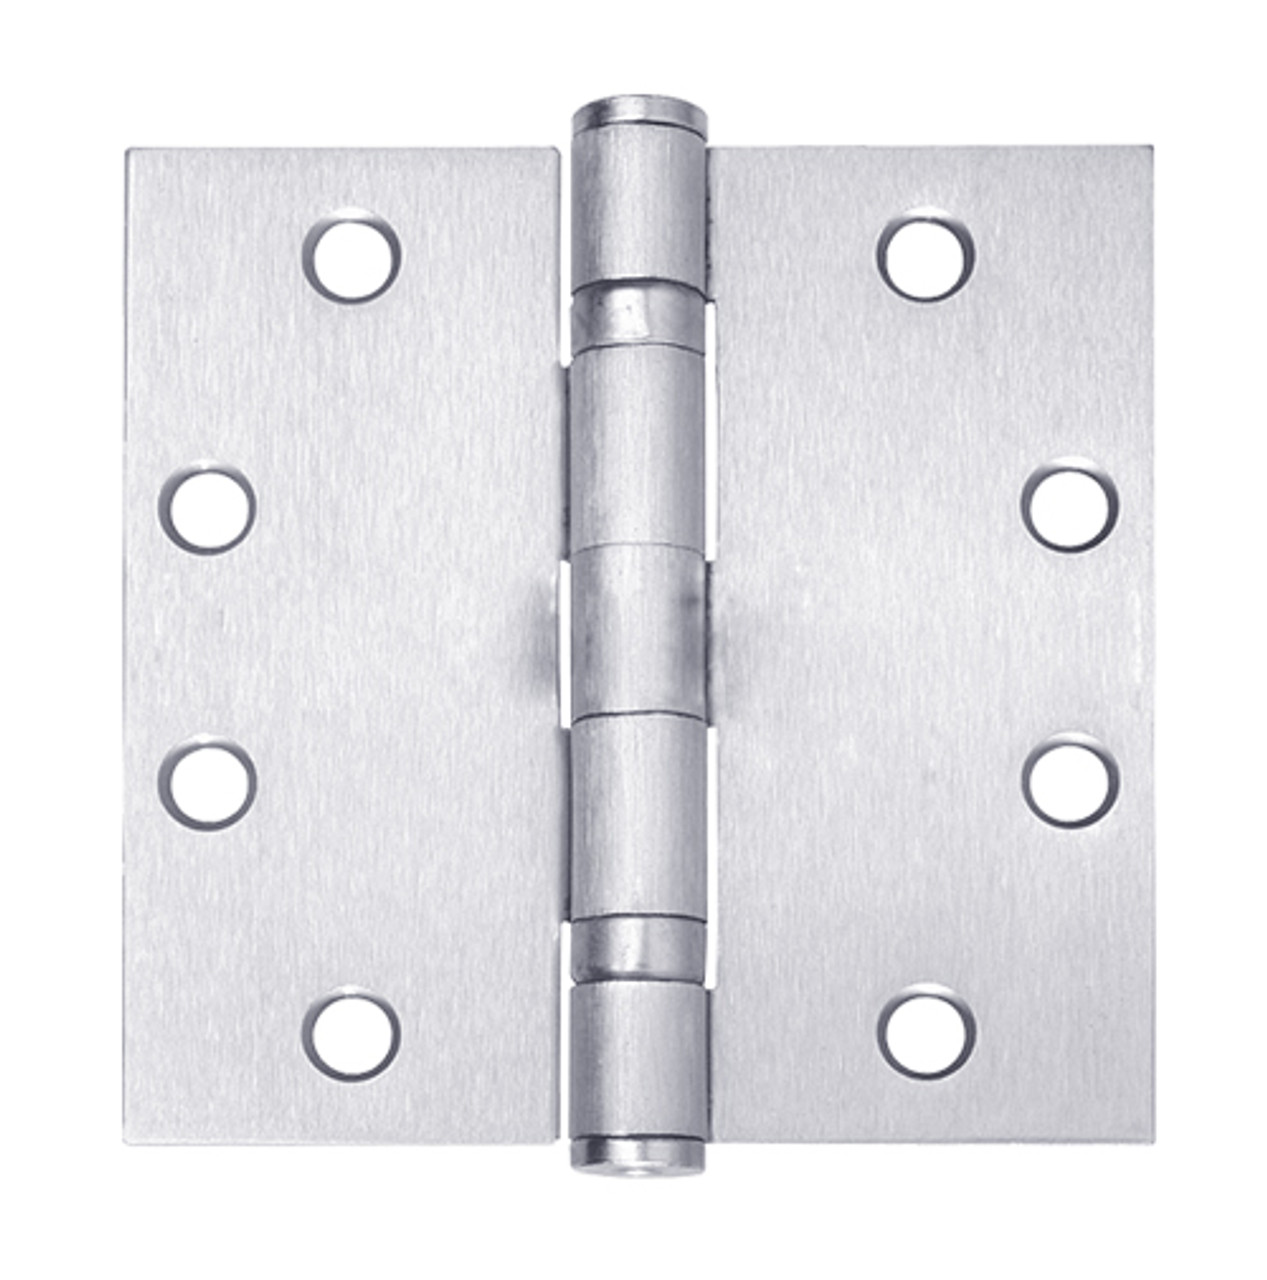 5BB1-4-5x4-5-625-NRP IVES 5 Knuckle Ball Bearing Full Mortise Hinge in Bright Chrome